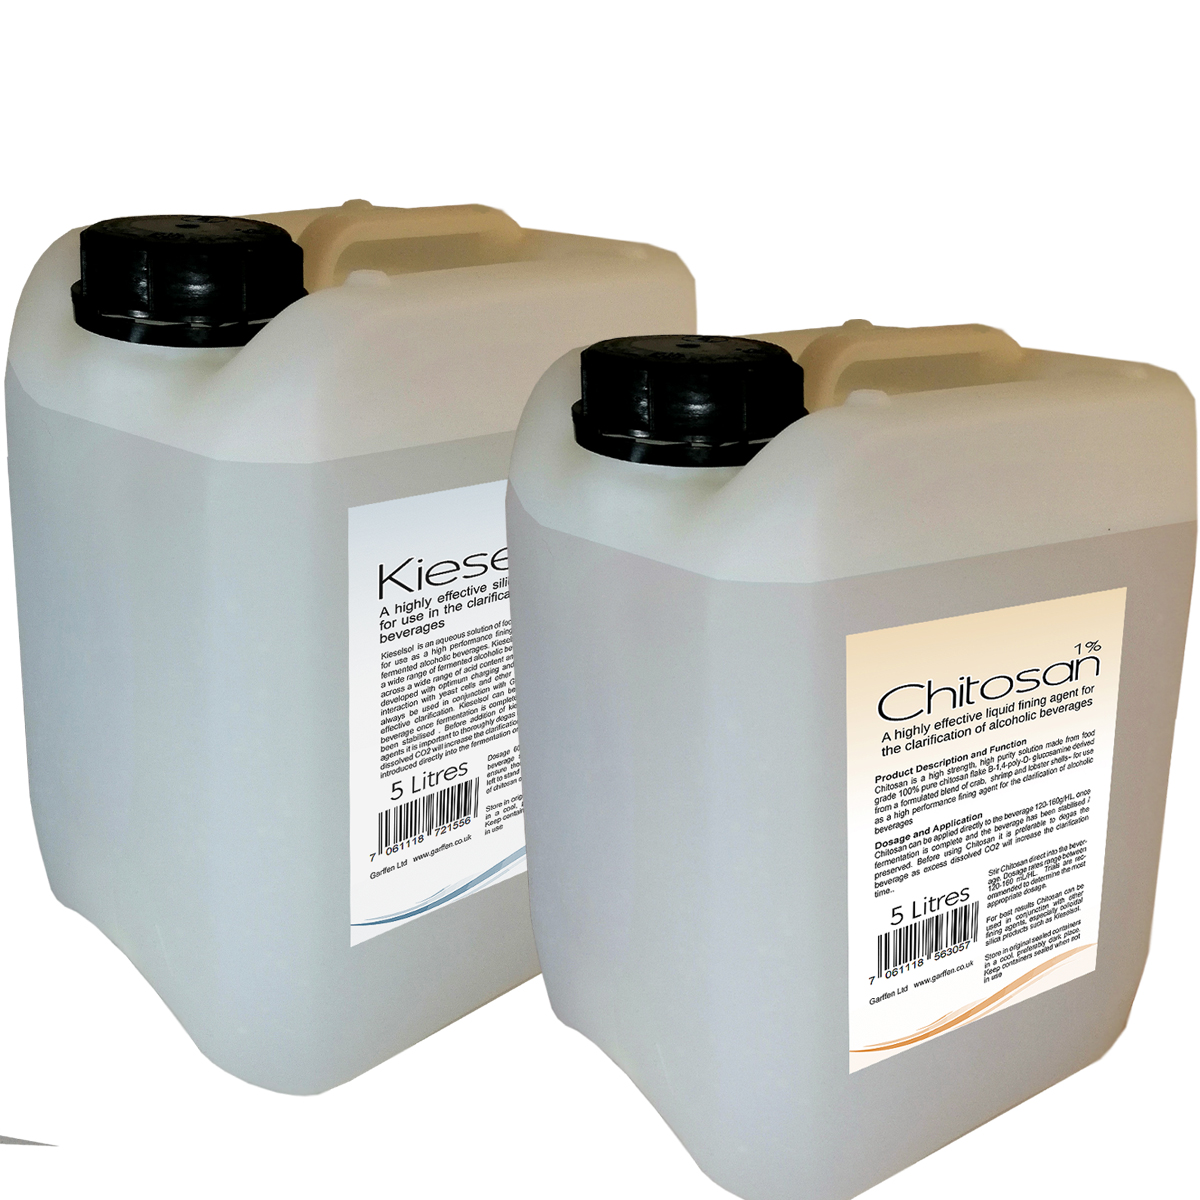 Kieselsol and Chitosan 5+5 litres